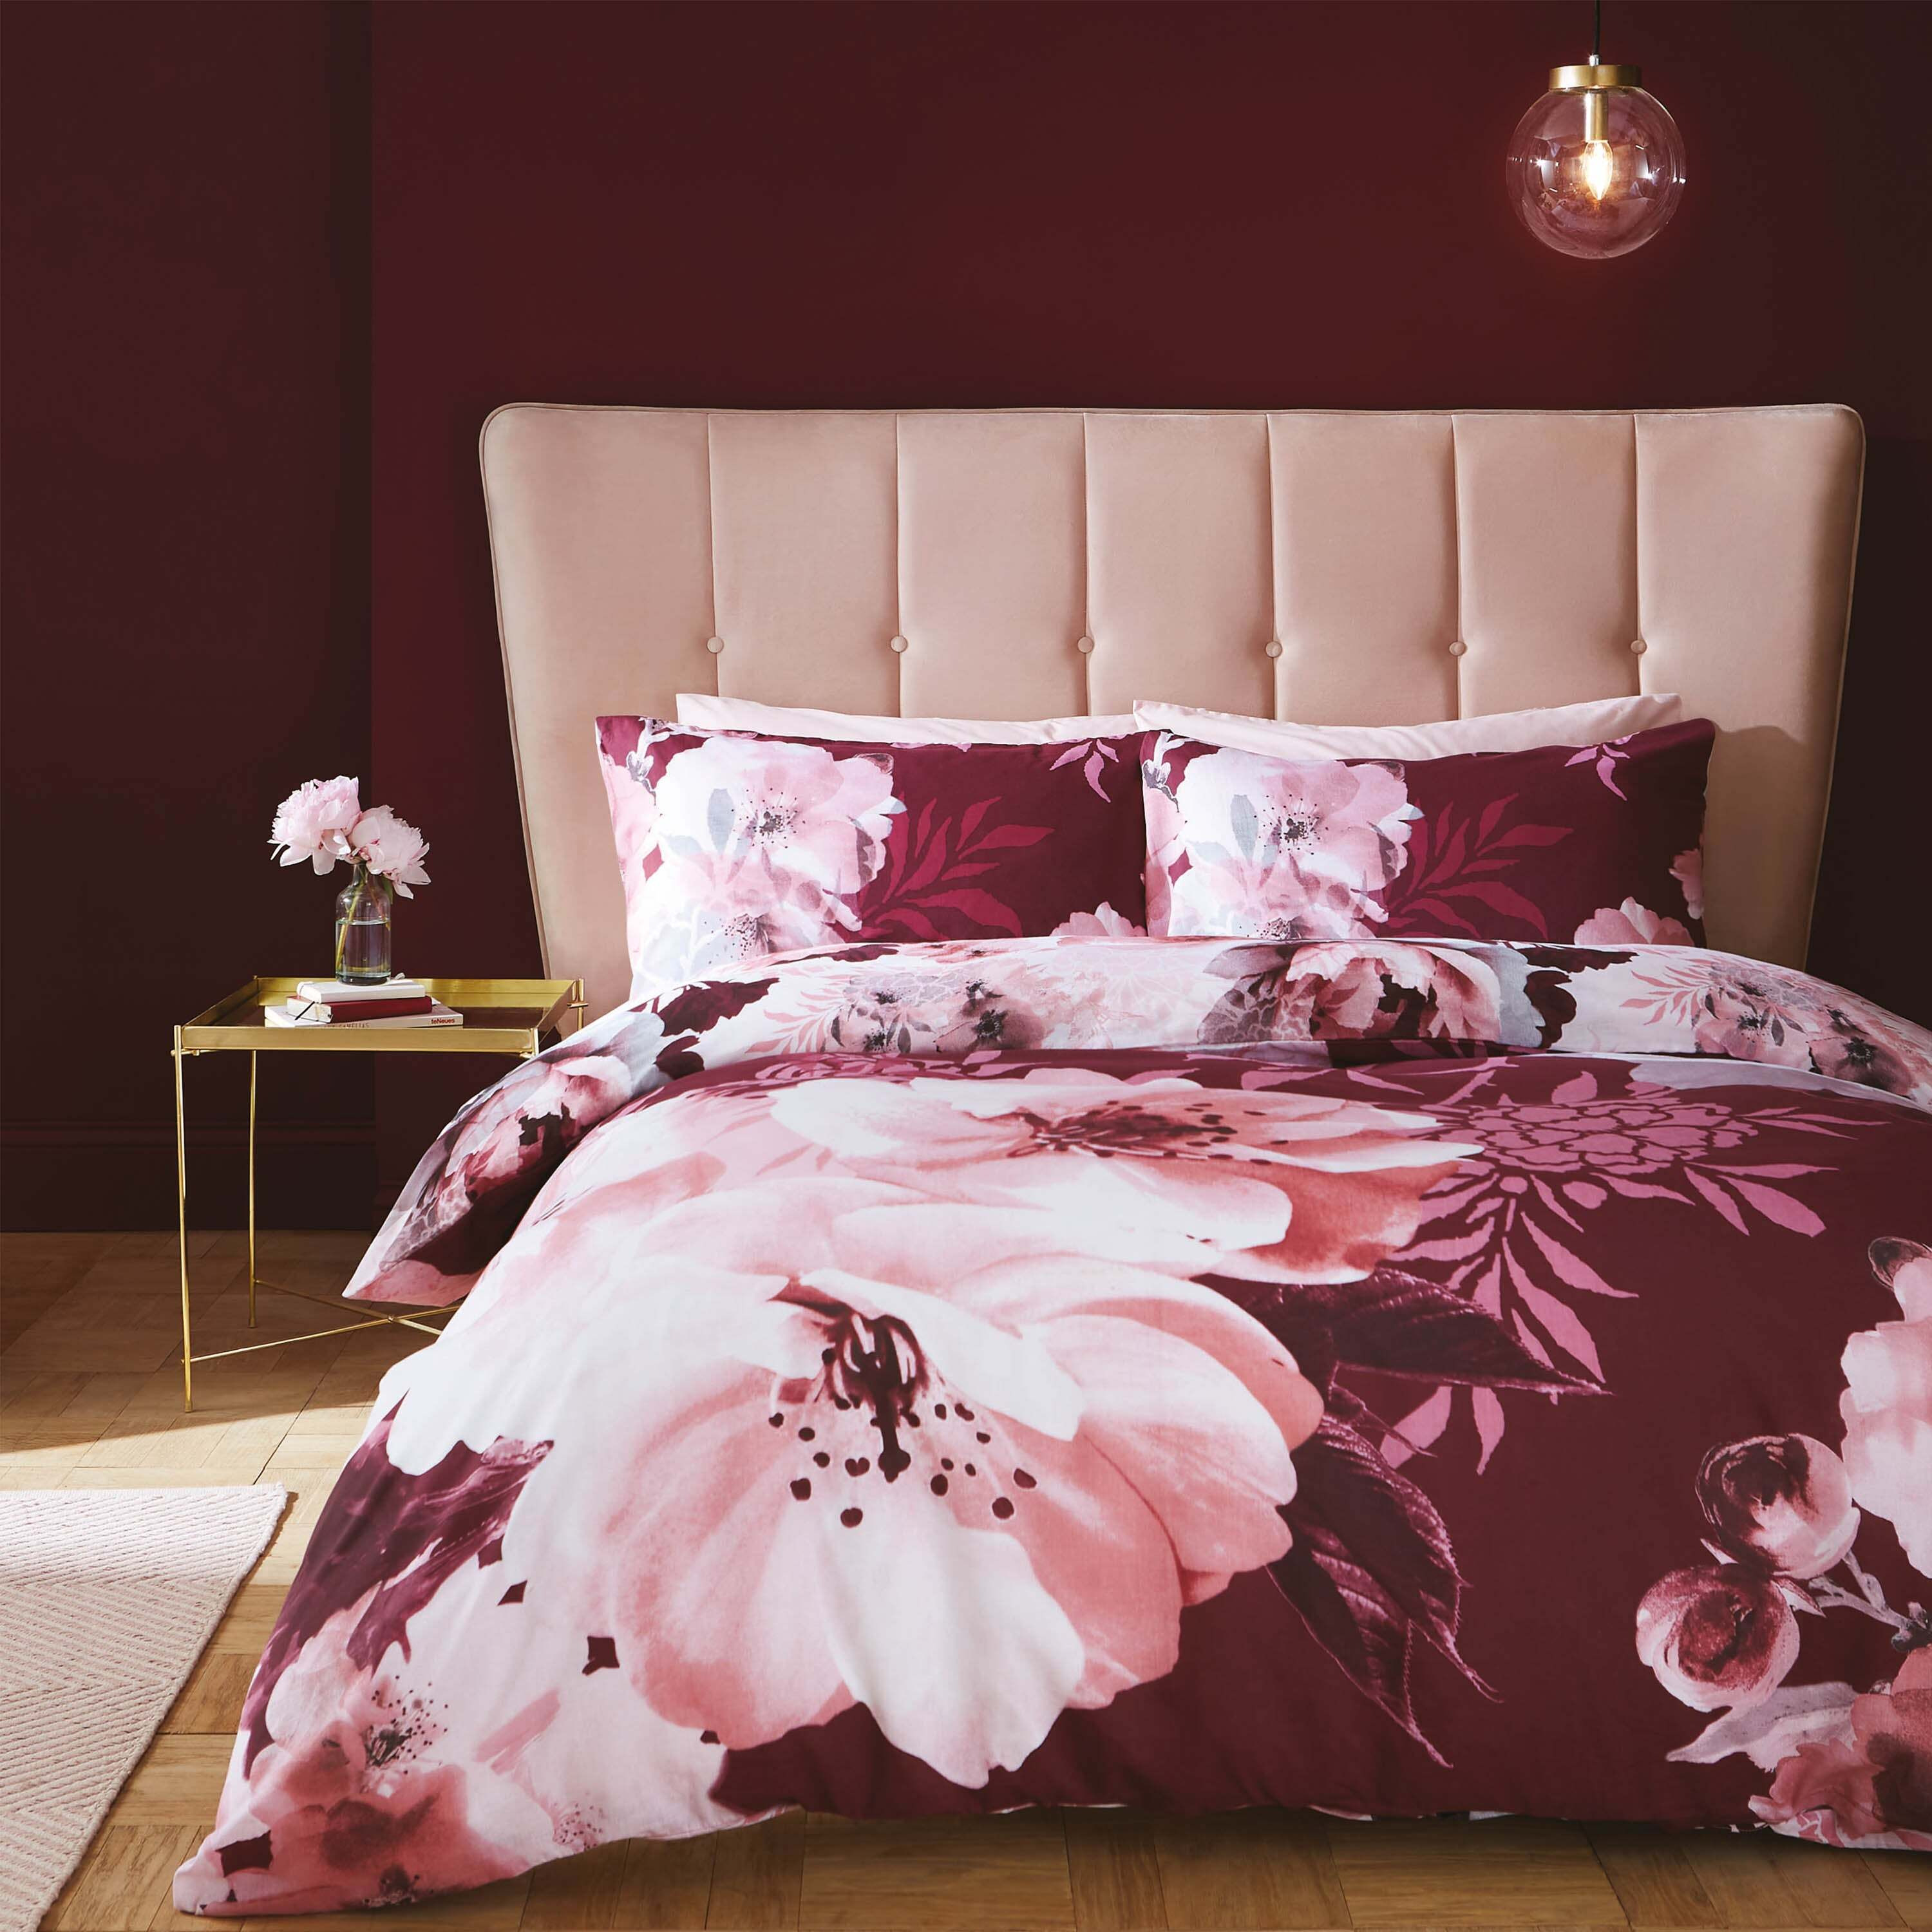 Catherine Lansfield Dramatic Floral Claret Duvet Cover and Pillowcase Set Red/White